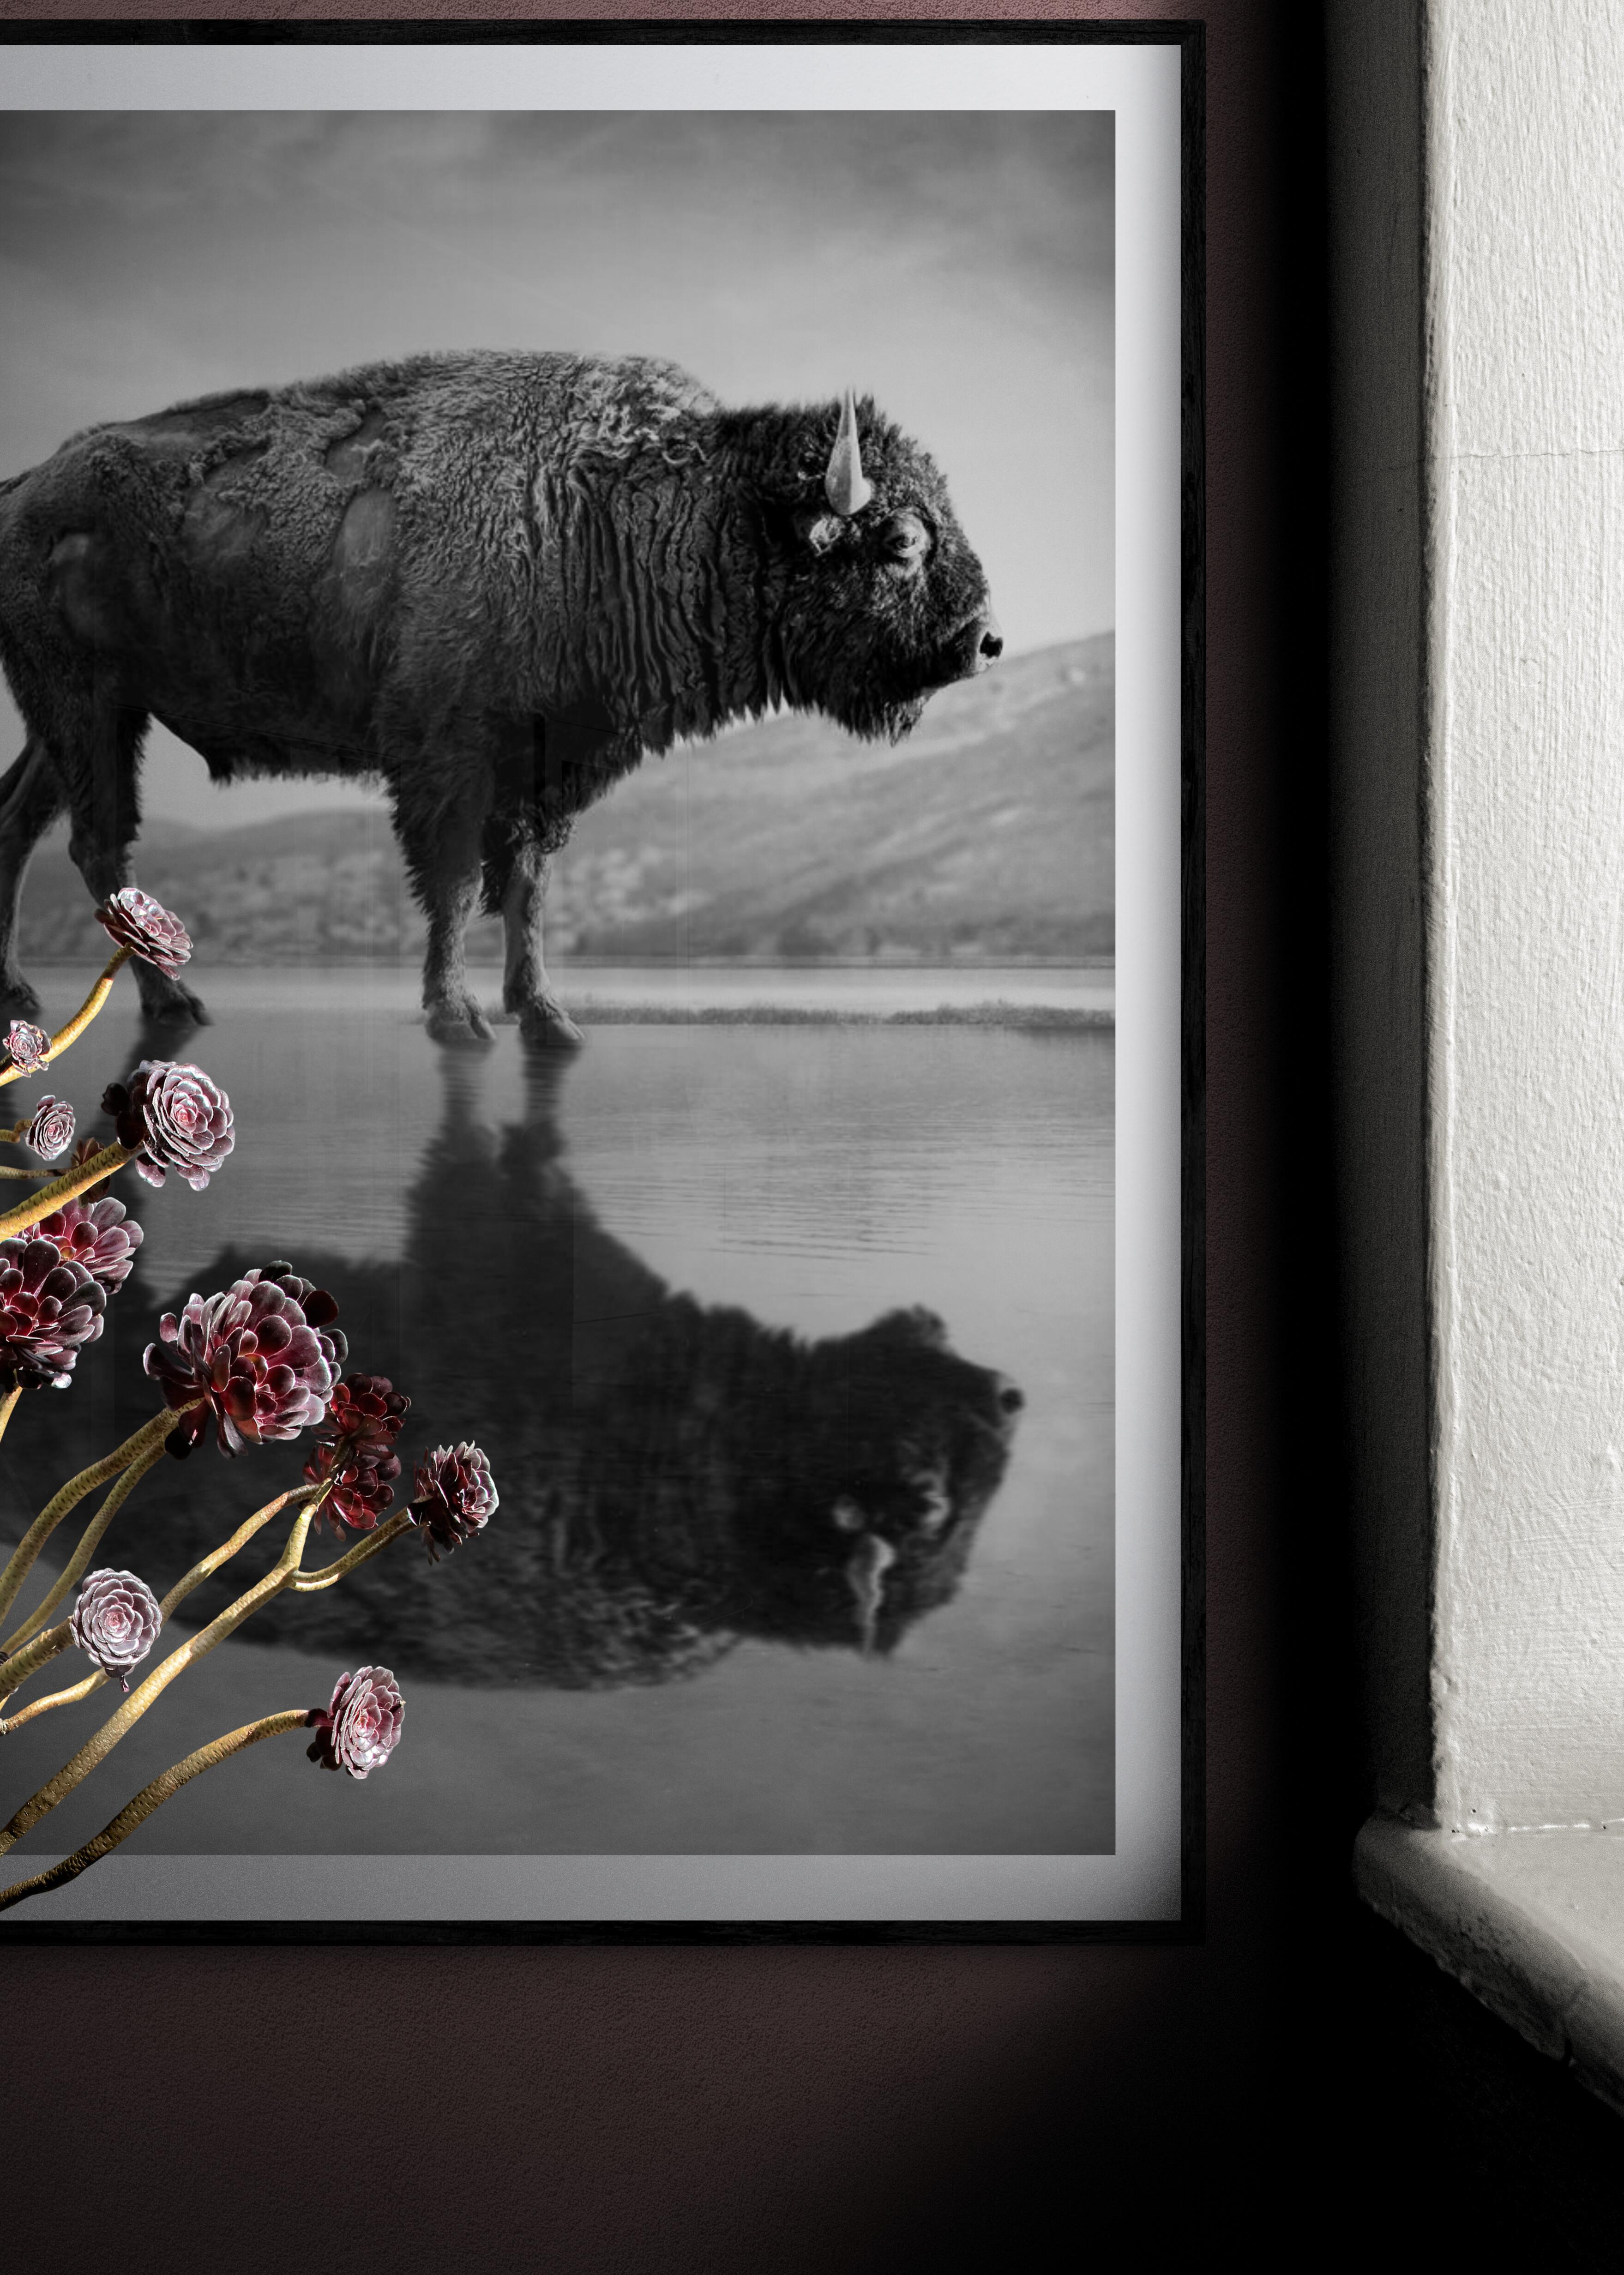 This is a contemporary photograph of an American Bison. 
Printed on archival paper and using archival inks
Framing available. Inquire for rates. 
Signed Edition of 12

Shane Russeck has built a reputation for capturing America's landscapes, cultures